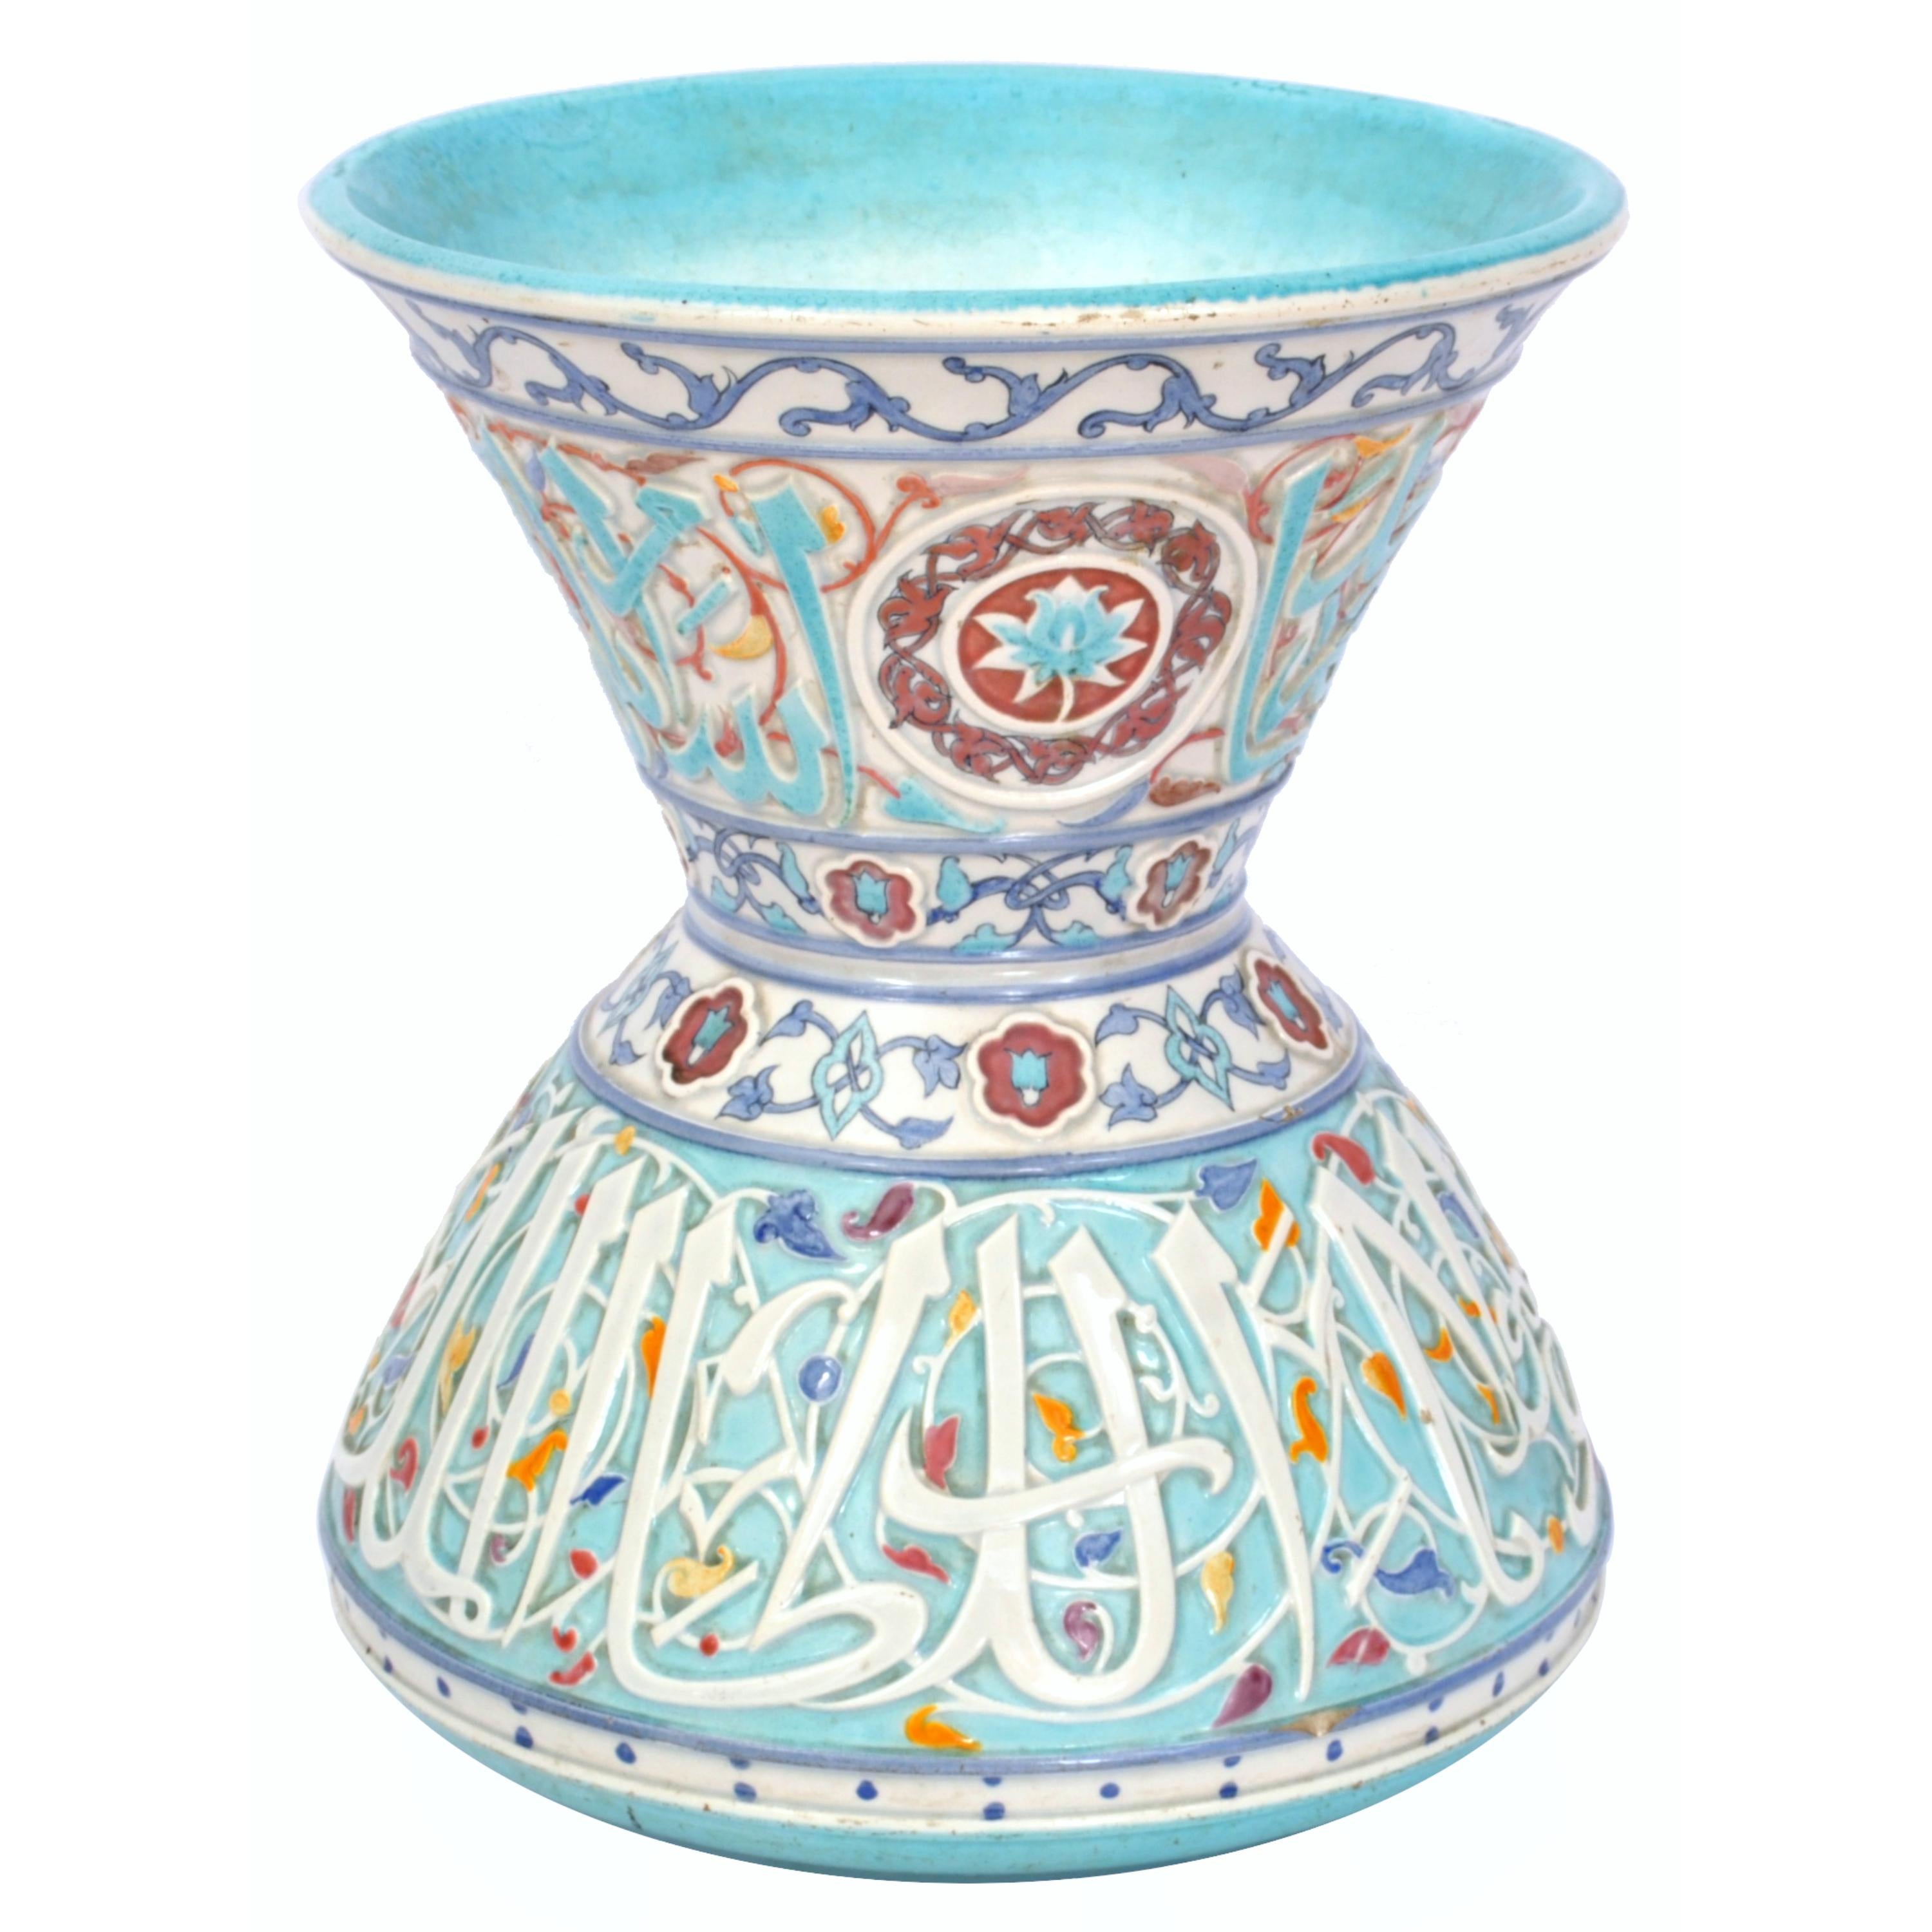 A rare and impressive antique Pottery mosque lamp by Theodore Deck (1823-1891), made circa 1880.
The lamp having a broad flared neck decorated with foliate and floral medallions and a large band of raised blue Naskh script, the base of globular